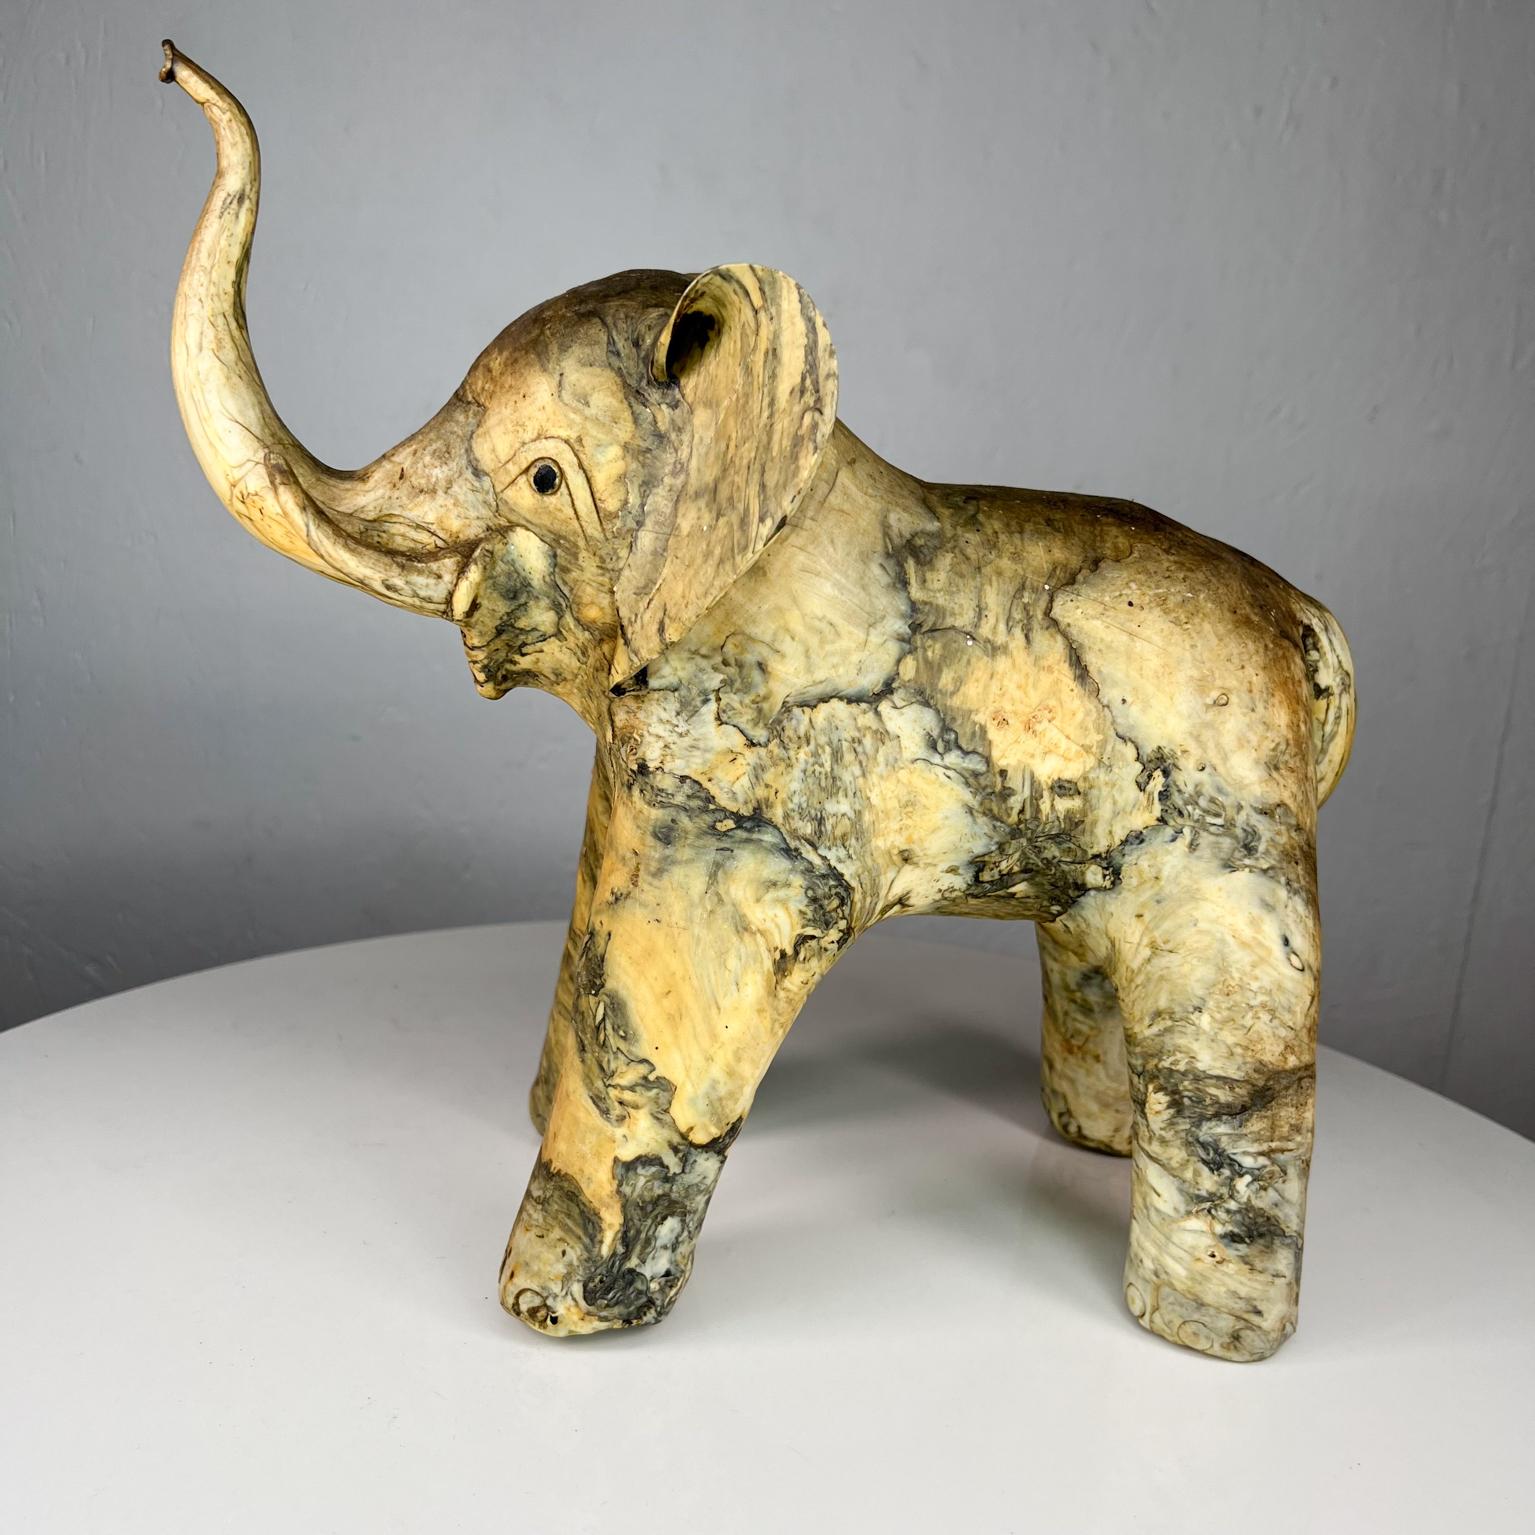 Handmade elephant sculpture oyster shell Art.
Measures: 12 tall x 12.25 deep x 5.5 wide.
Preowned original vintage condition.
See images provided.